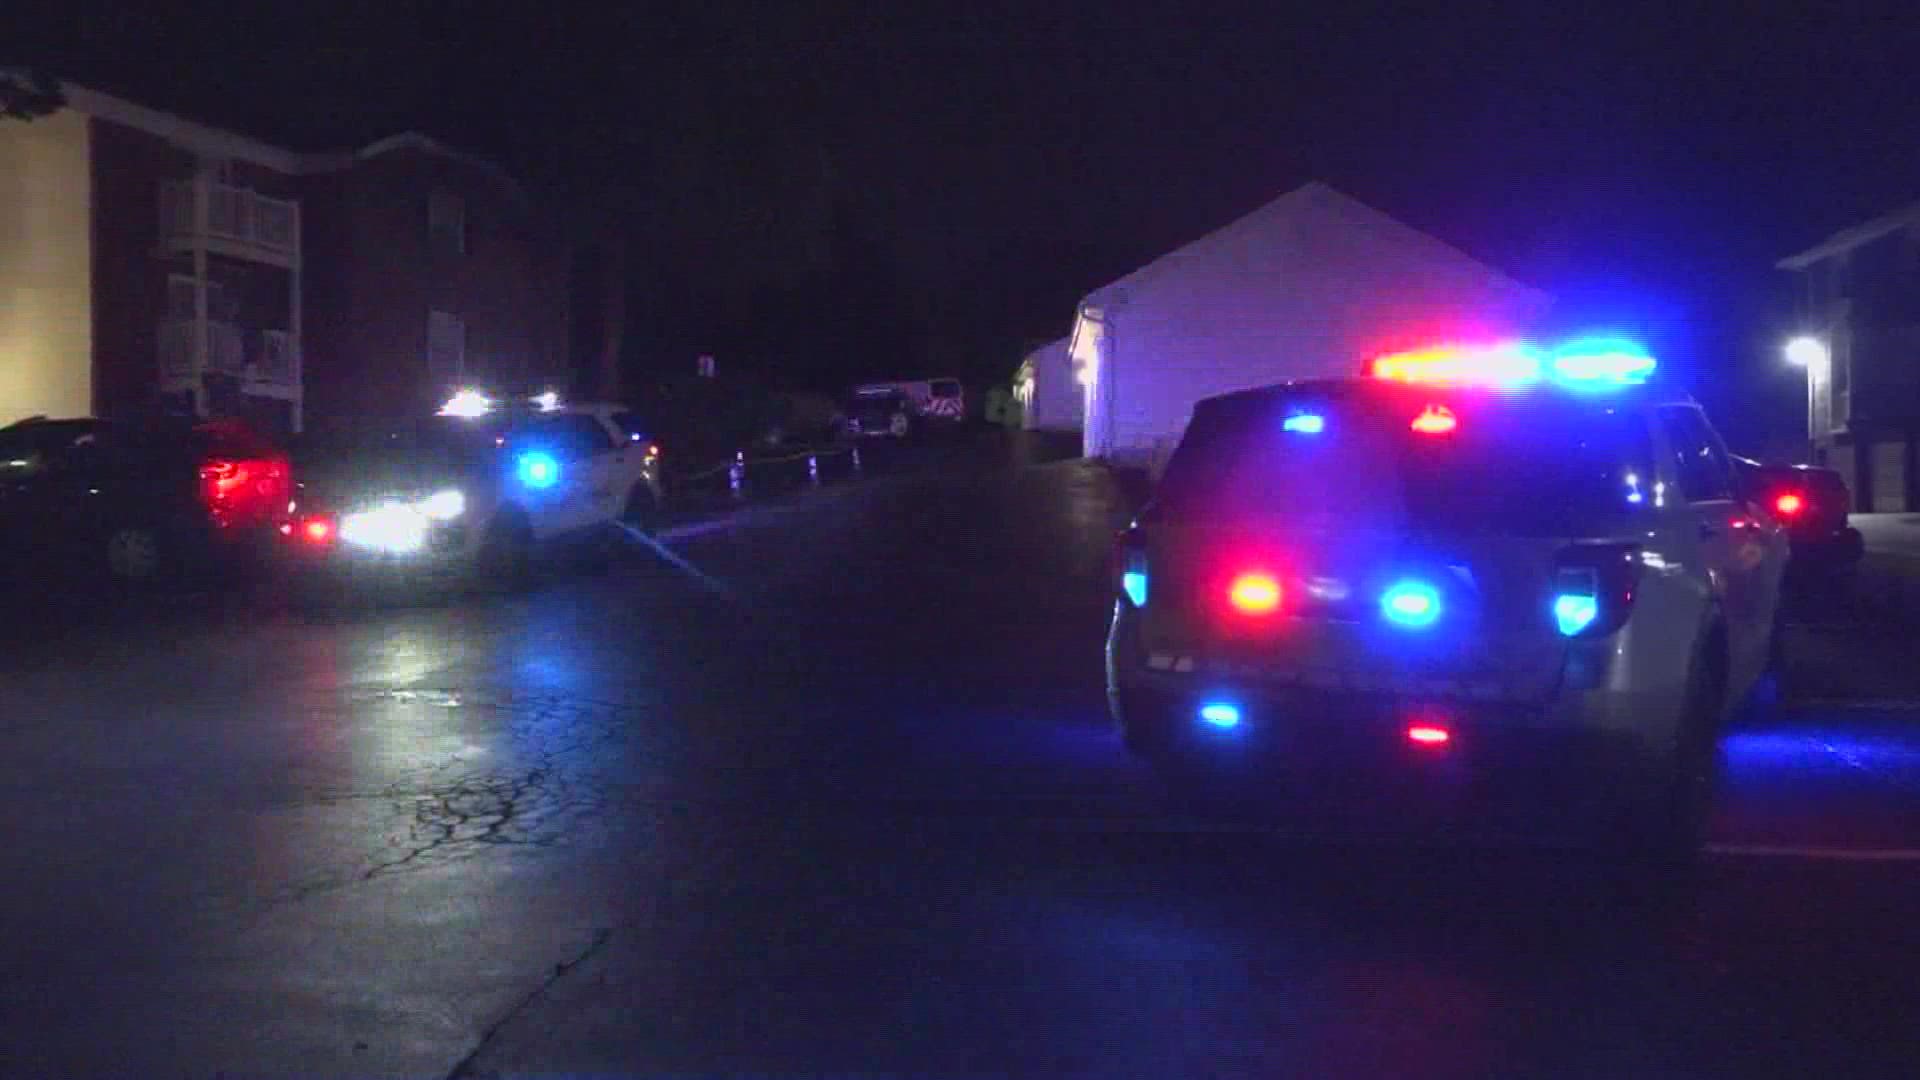 An investigation is underway after a double shooting left one man dead and another injured in St. Louis County early Friday morning.